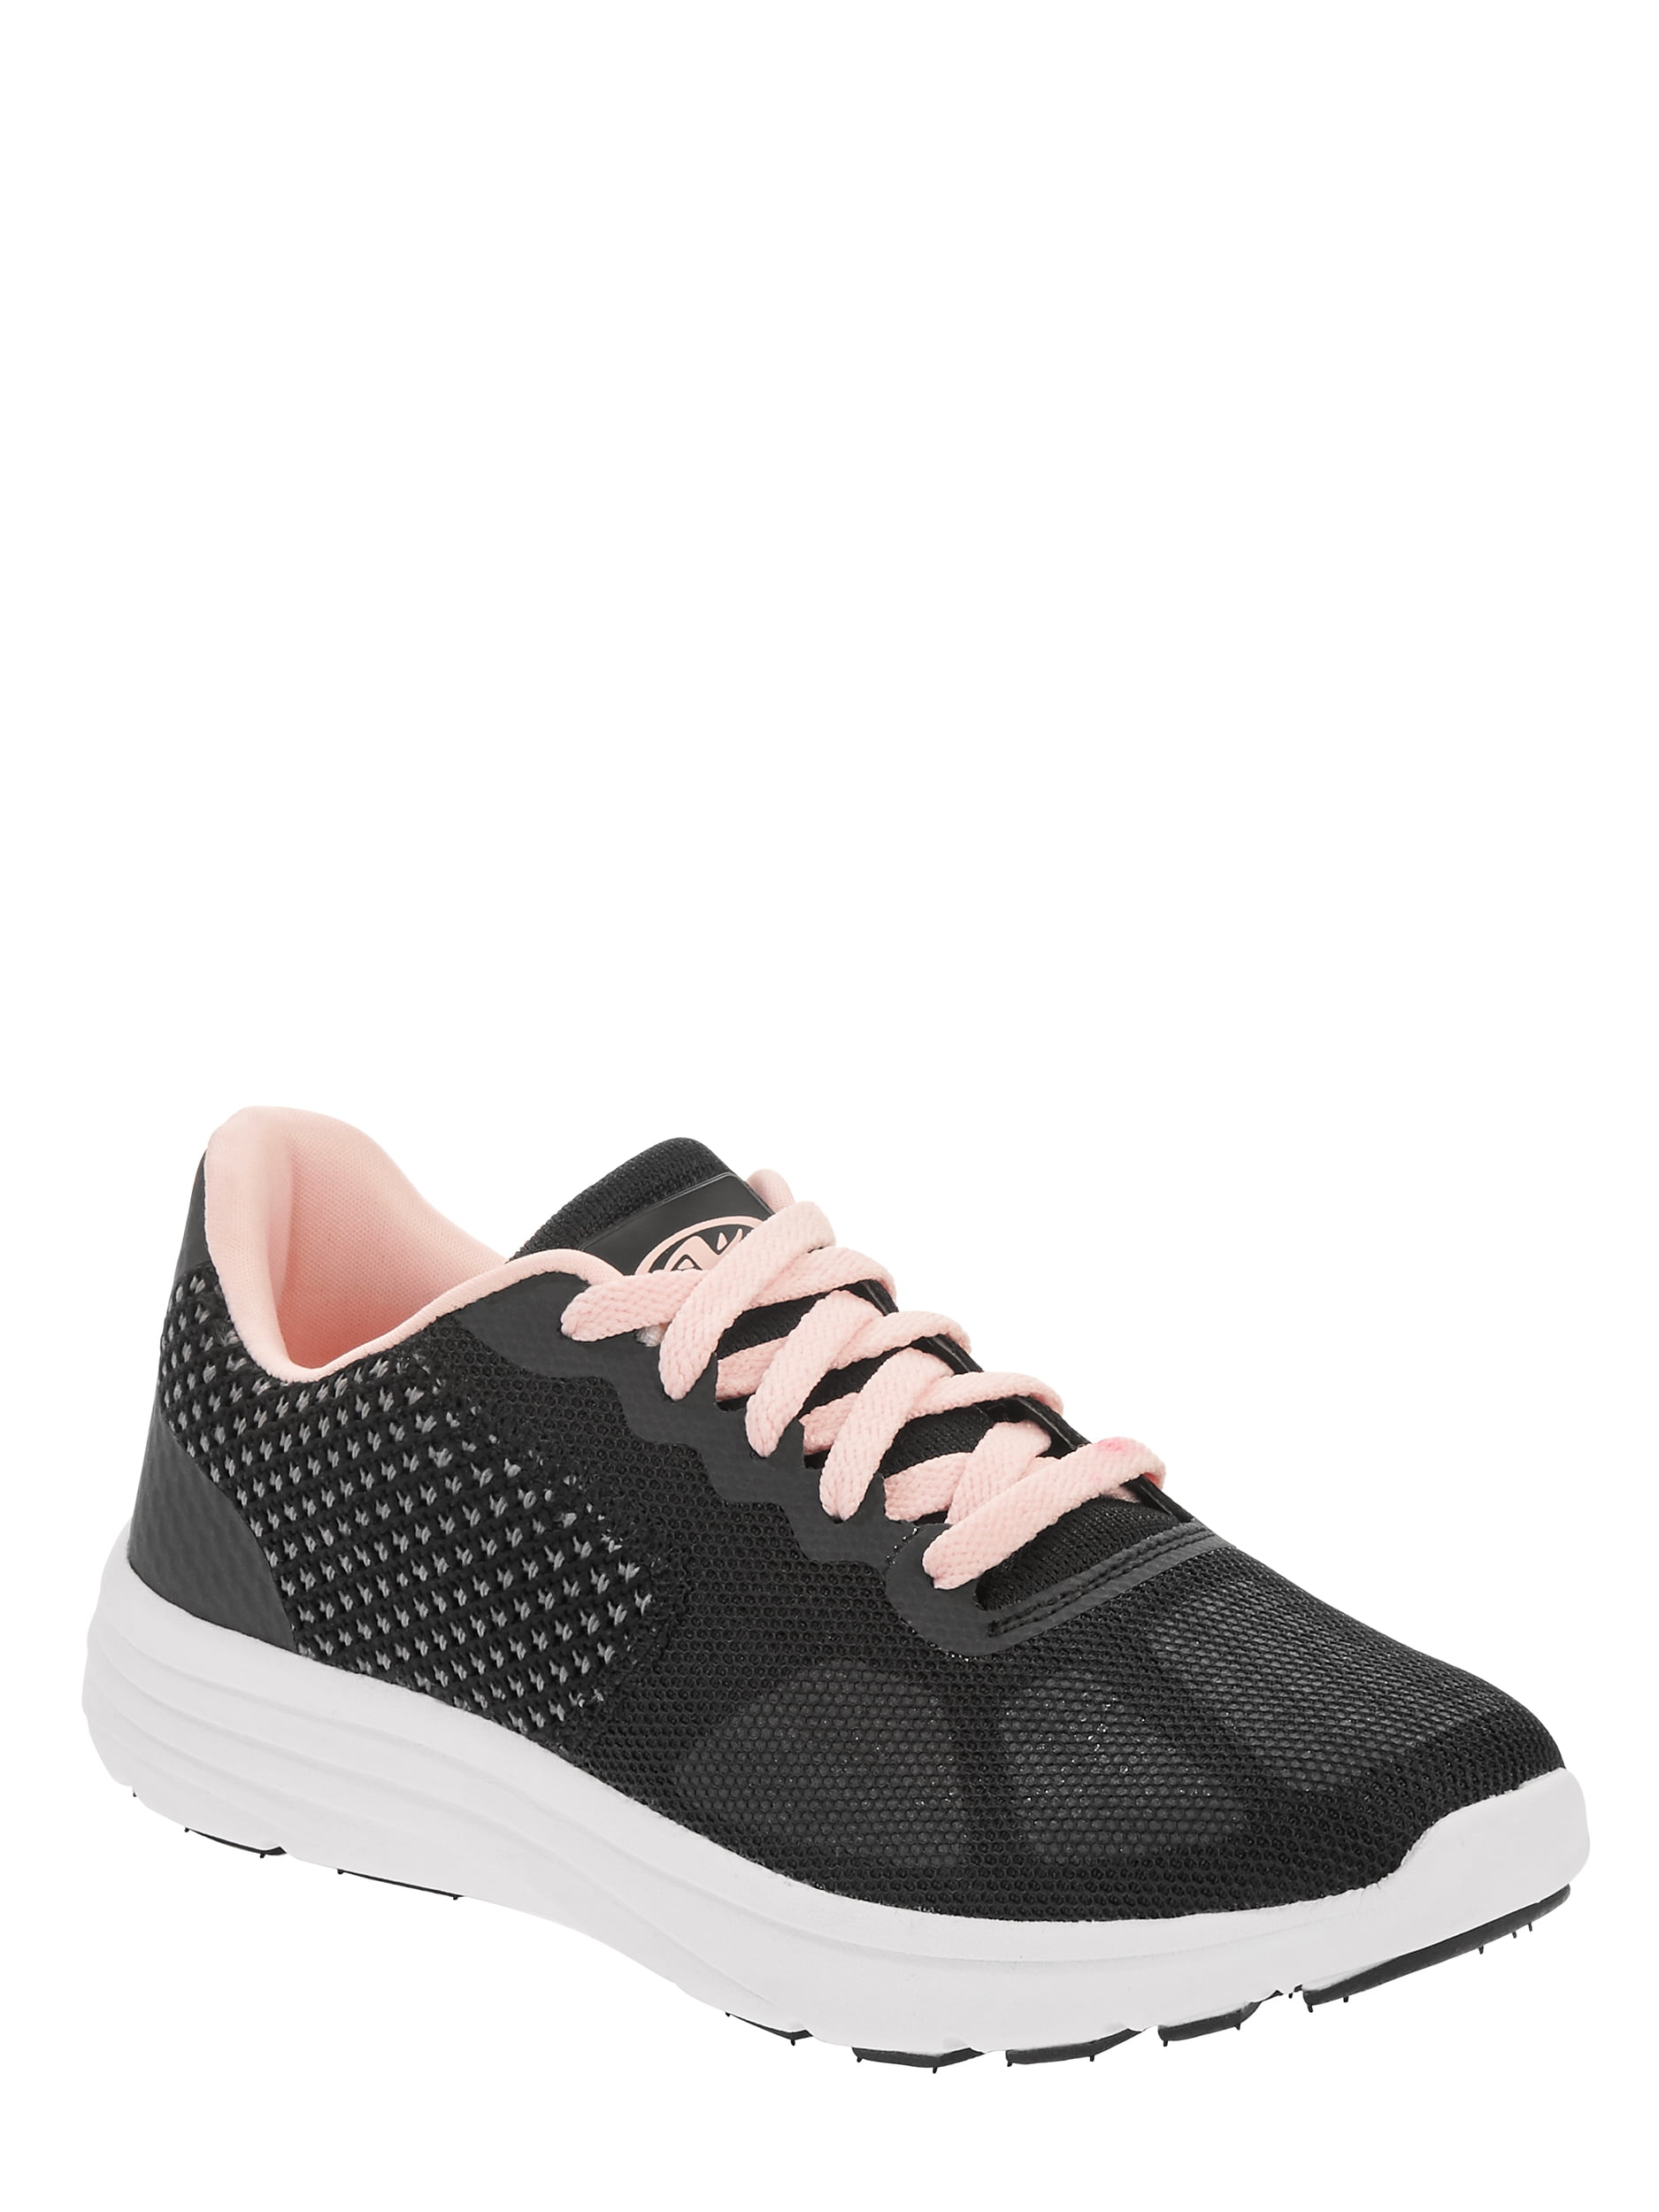 walmart athletic works women's shoes